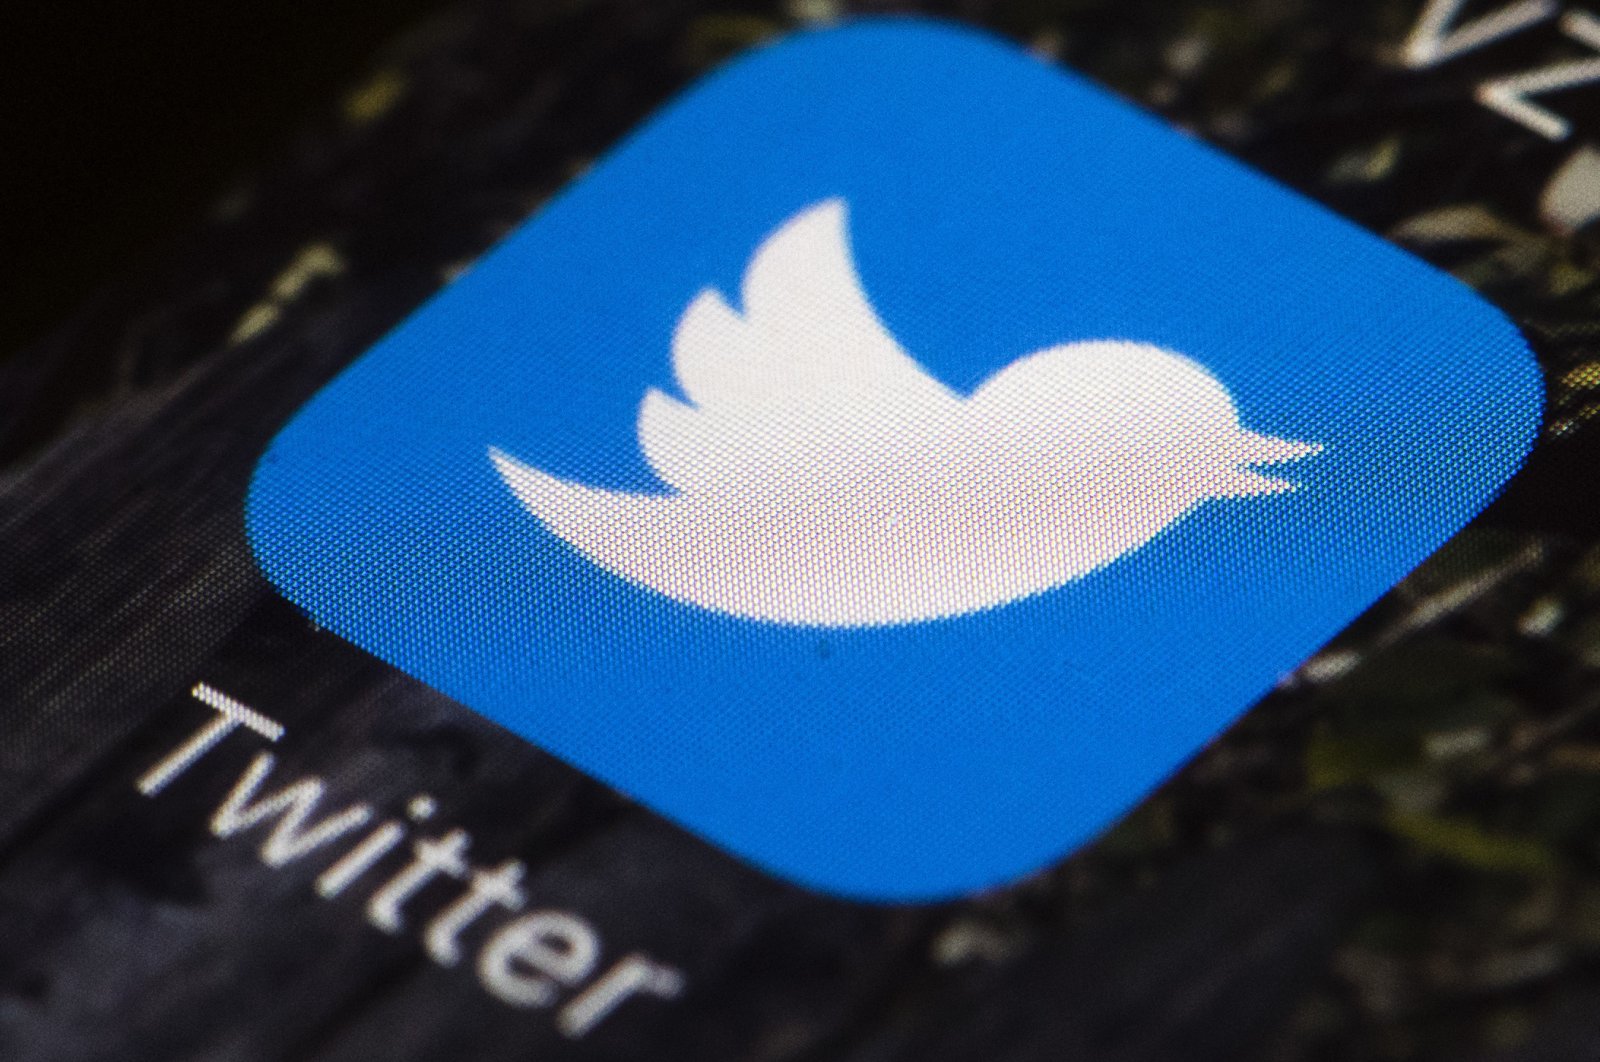 The Twitter app icon on a mobile phone in Philadelphia, PA, April 26, 2017. (AP Photo)